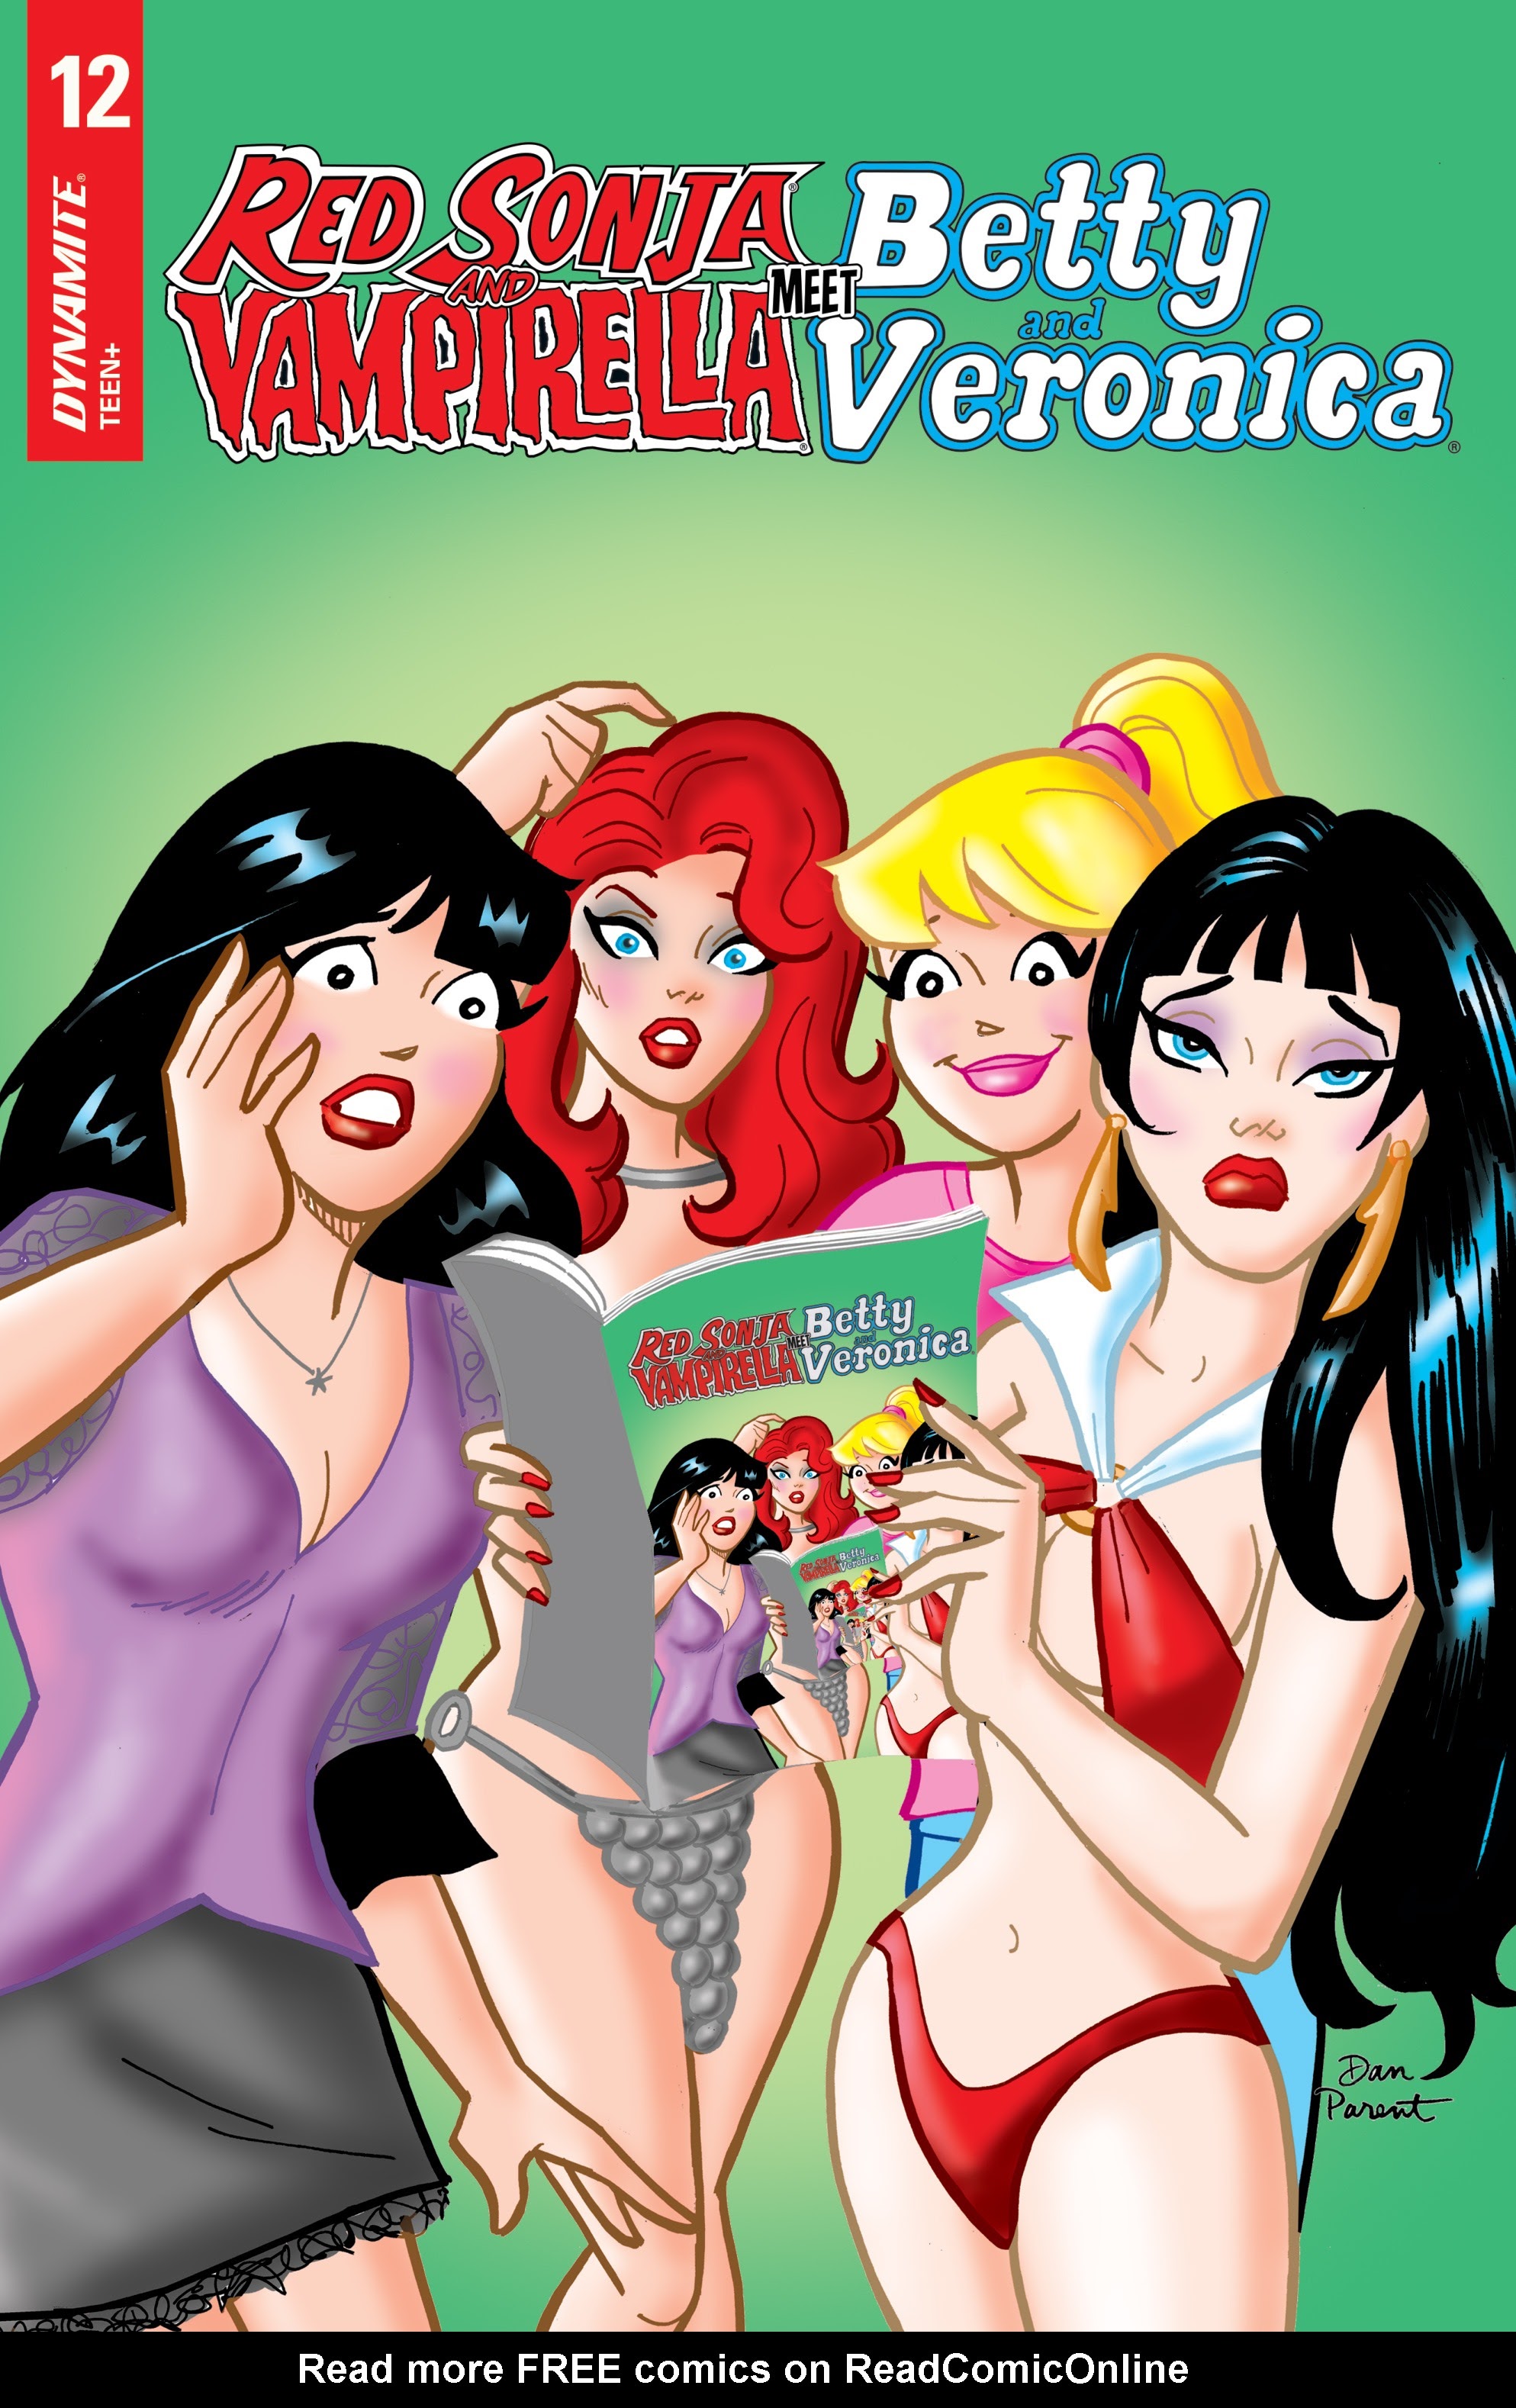 Read online Red Sonja and Vampirella Meet Betty and Veronica comic -  Issue #12 - 4